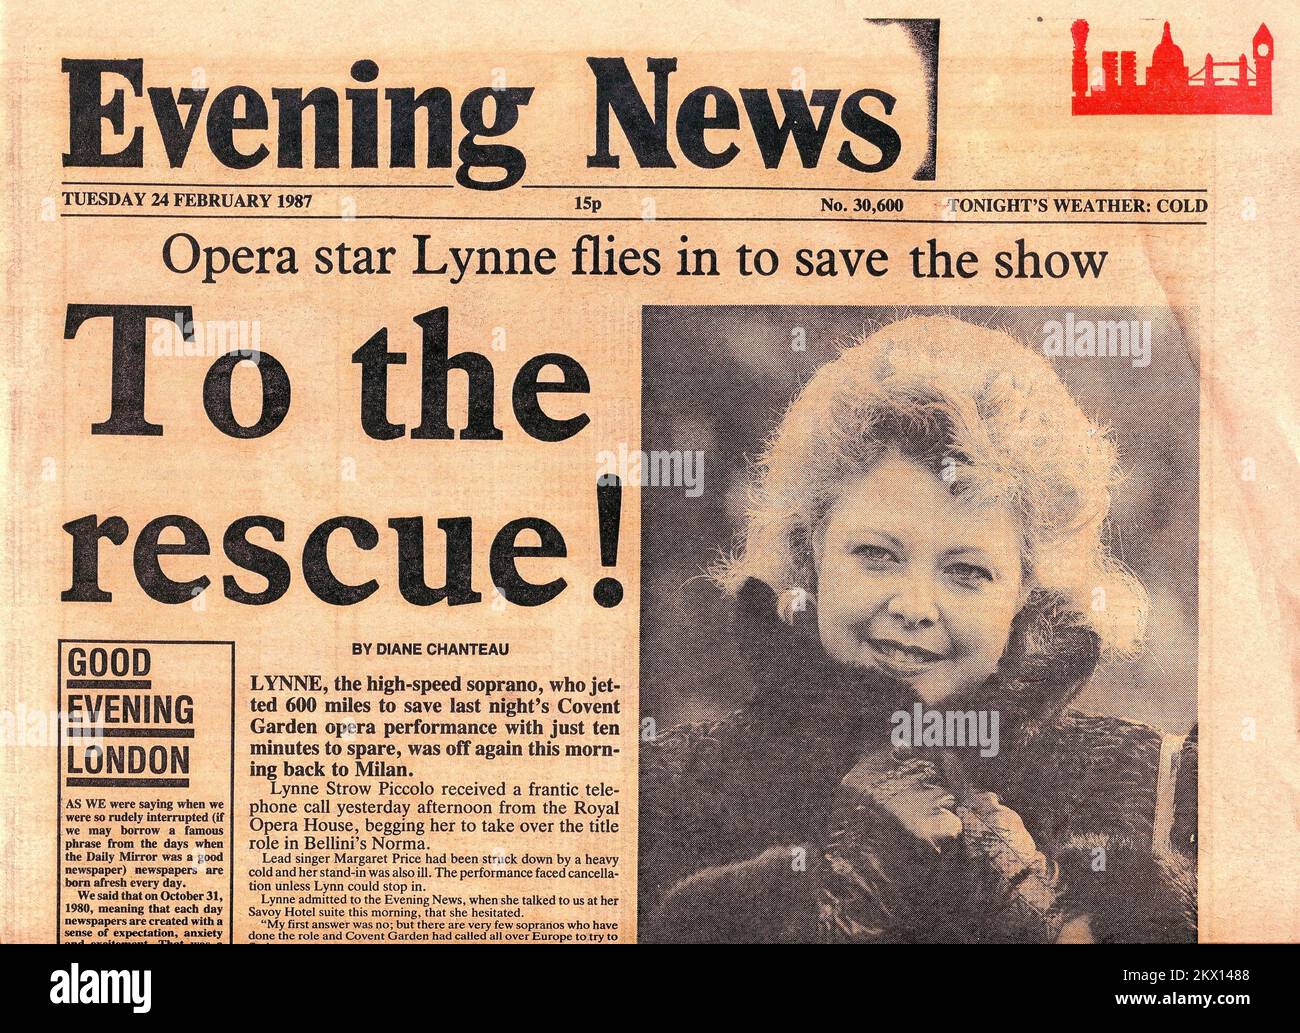 Relaunch issue of the (London) Evening News which was published on February 24, 1987 as a spoiler to rival the London Daily News which launched on the same day. The paper was merged back into the Evening Standard in October 1987. Stock Photo